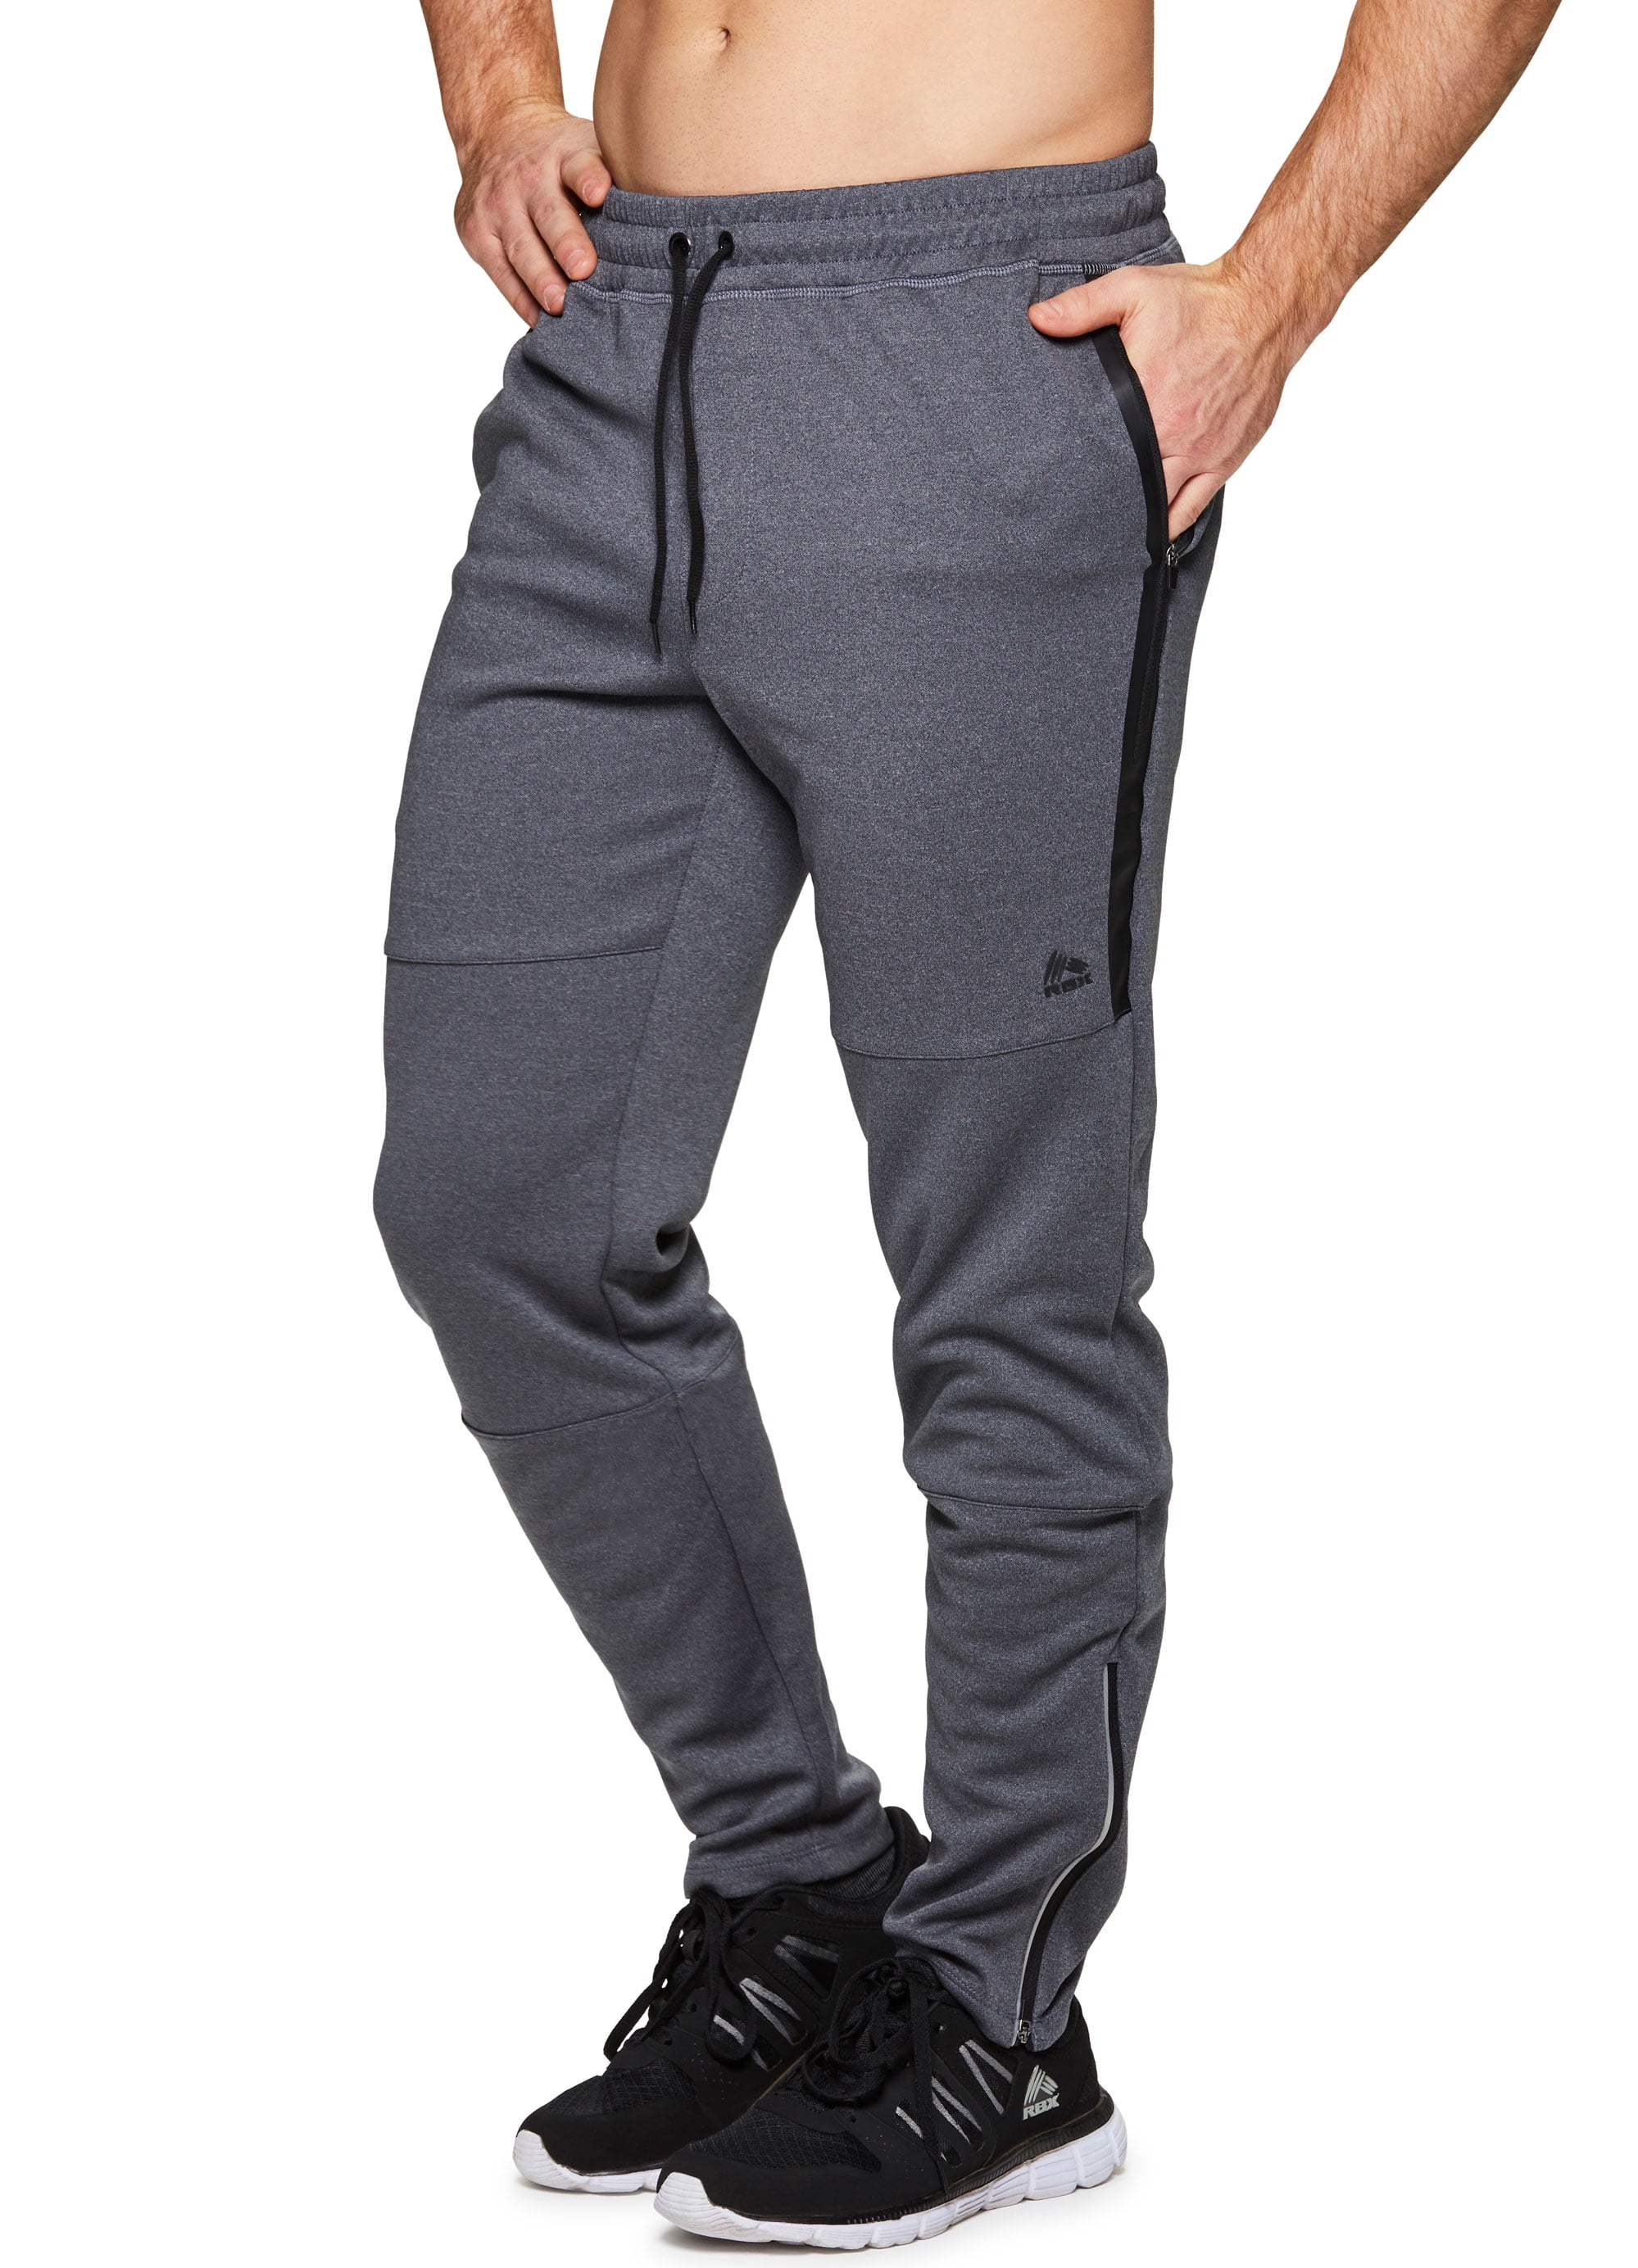 RBX - RBX Active Men's Tapered Pant with Bonded Zip Pocket Grey M ...